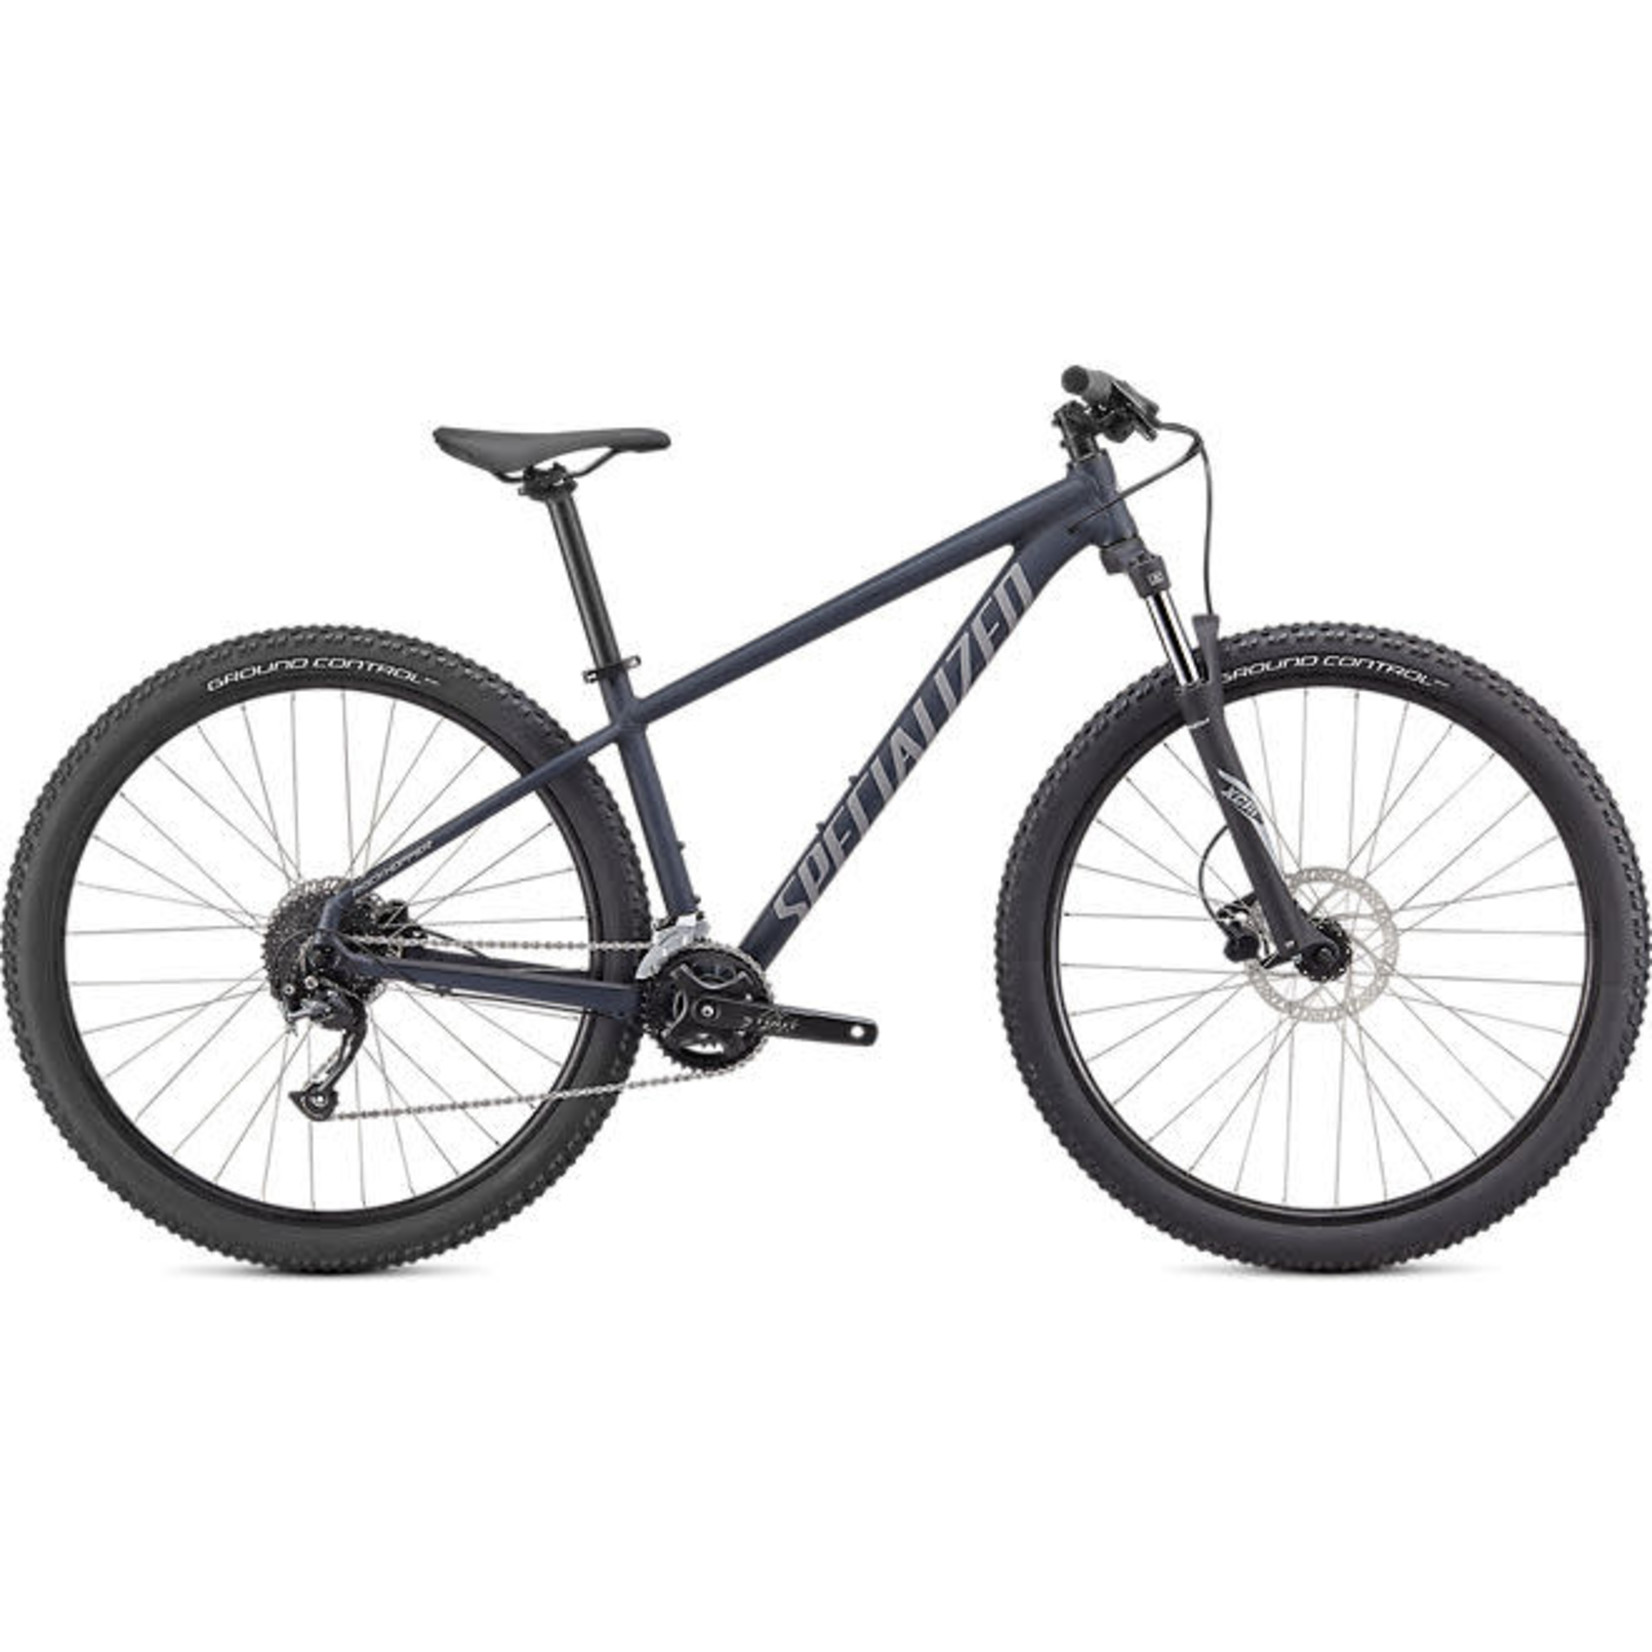 Specialized SPECIALIZED ROCKHOPPER SPORT 29 SLT/CLGRY L